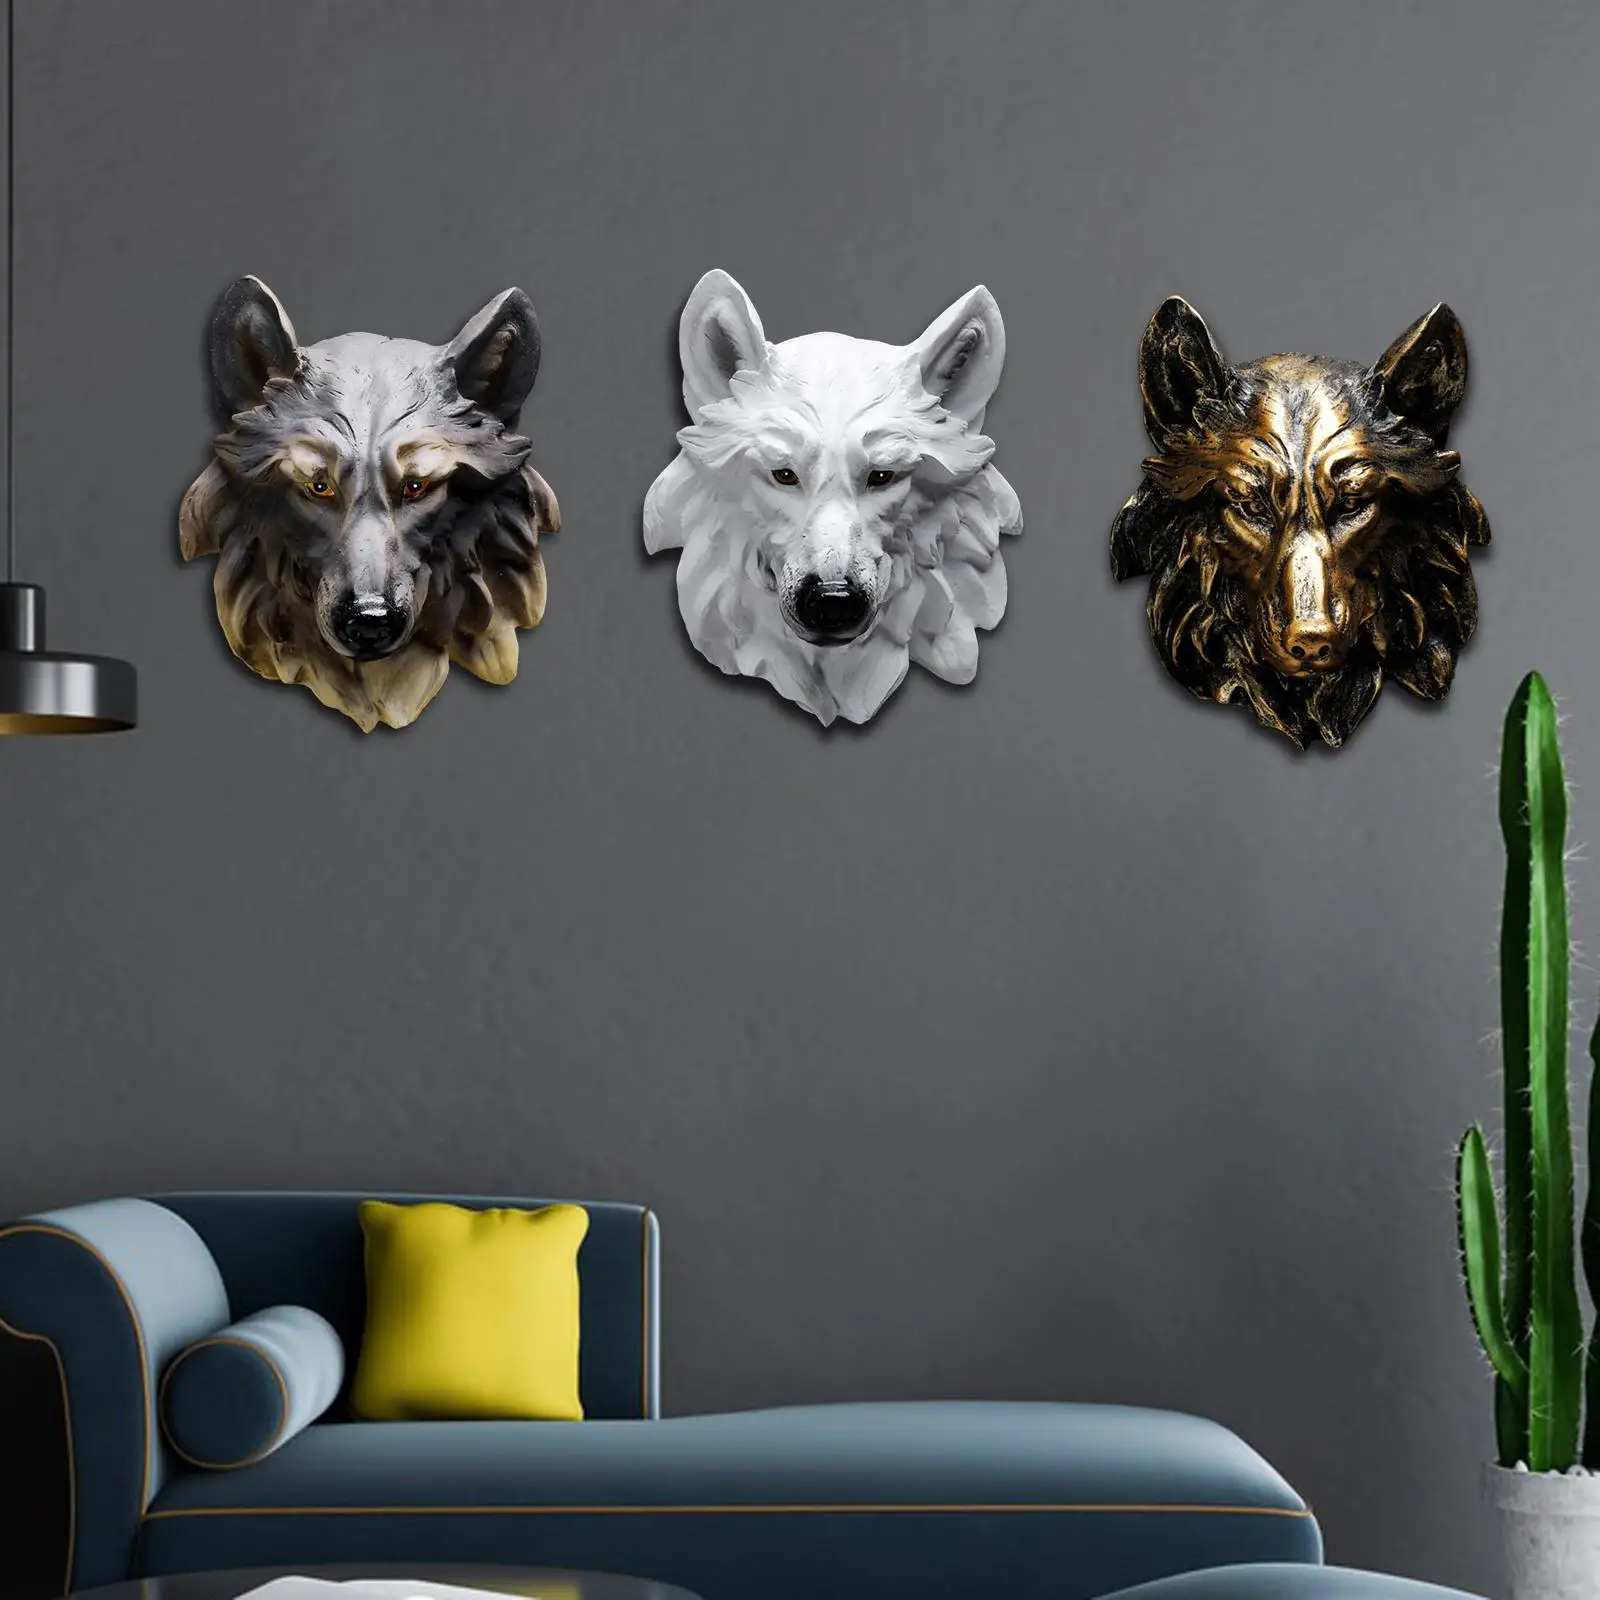 Animal  Wall Art Decorations Wall Hanging Ornaments for Farmhouse Fine Workmanship Durable Realistic Room Walls Decor